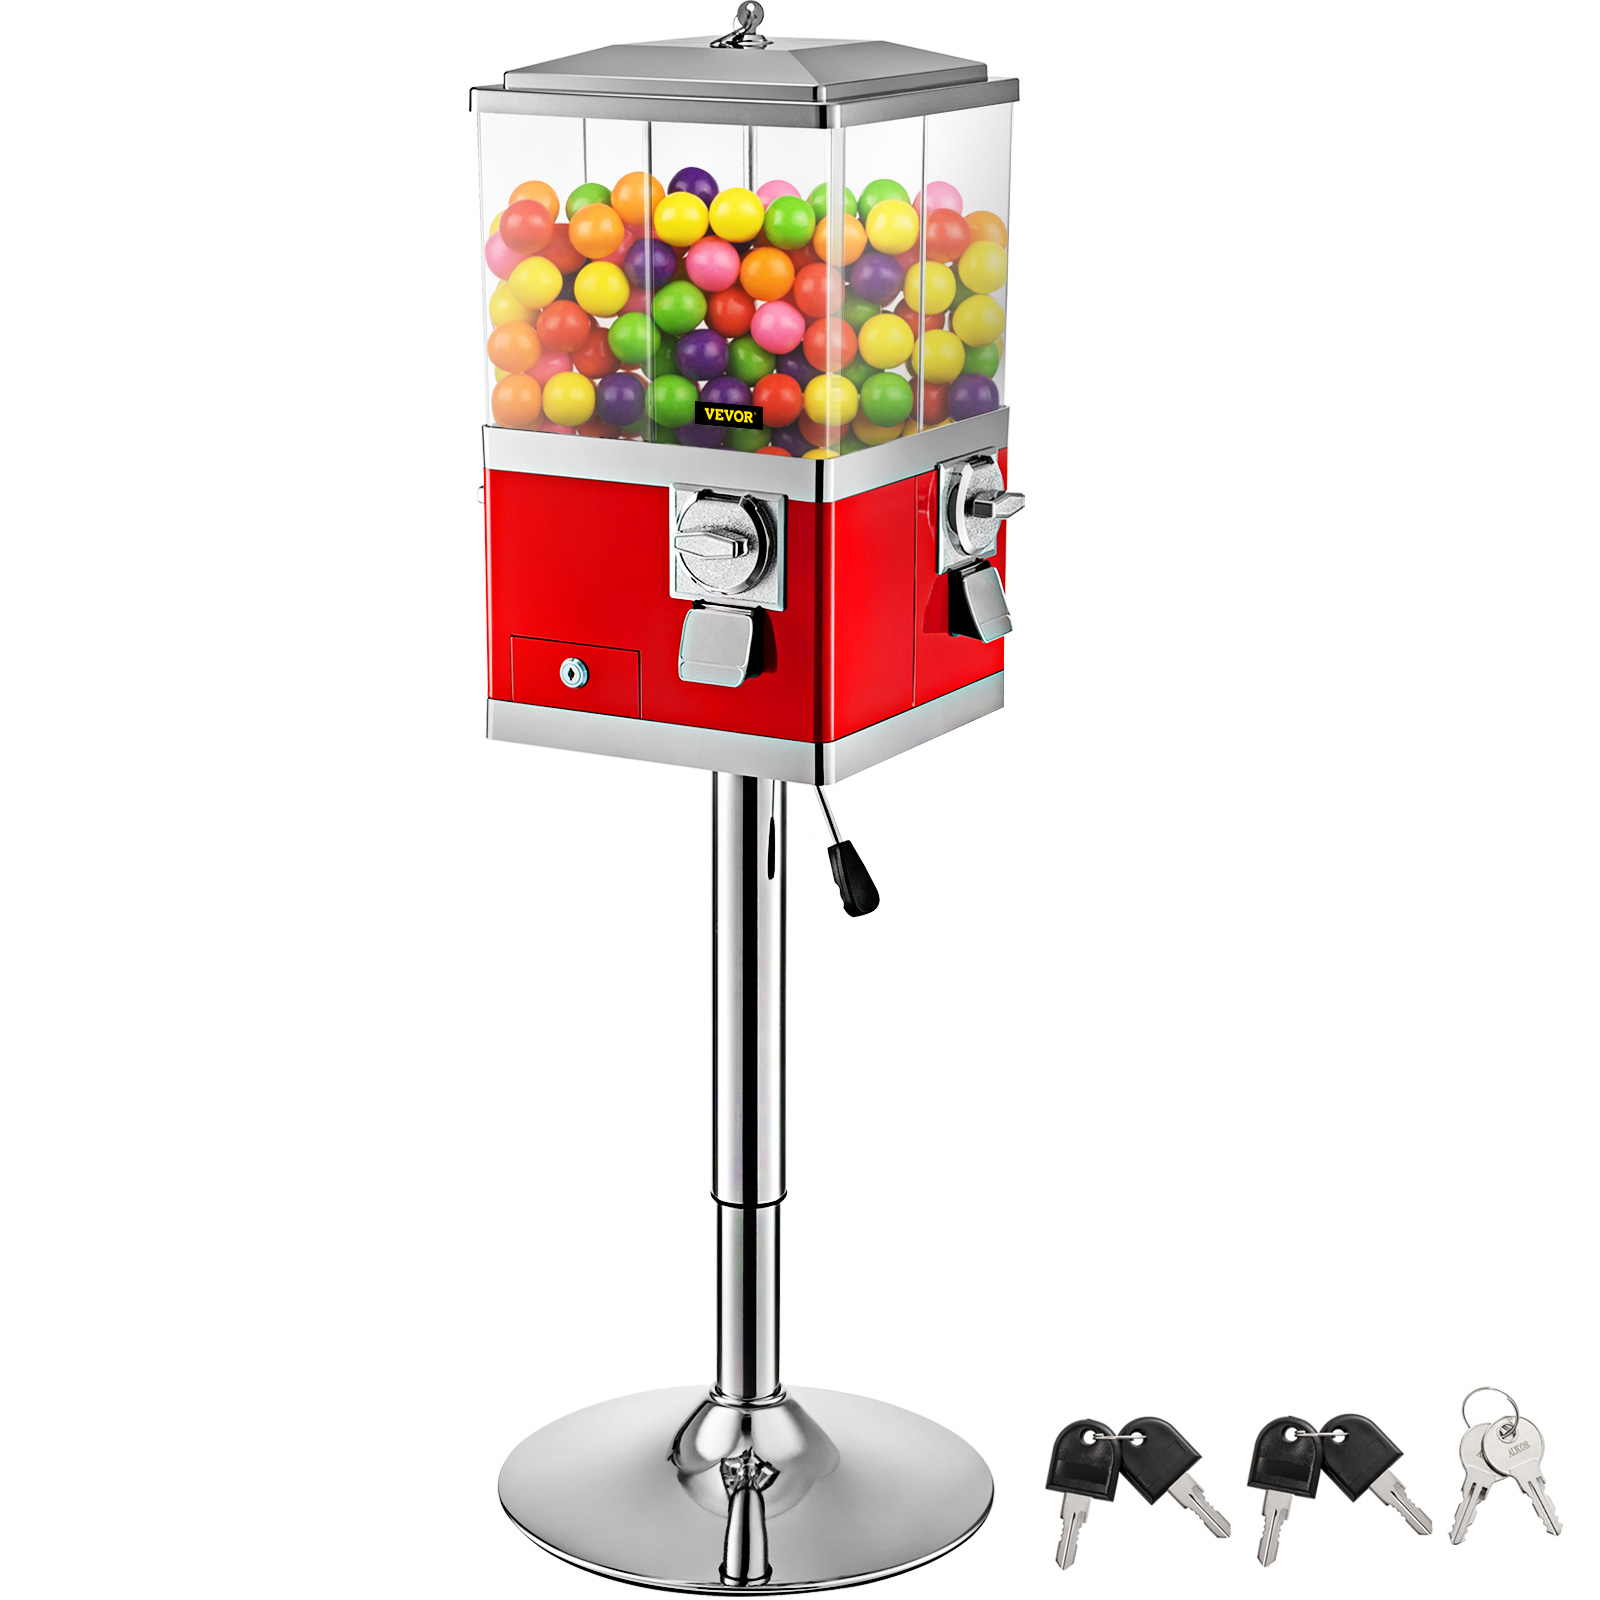 Vevor Gumball Machine Vintage Candy Dispenser With Iron Stand 41-50" Tall Red от Vevor Many GEOs